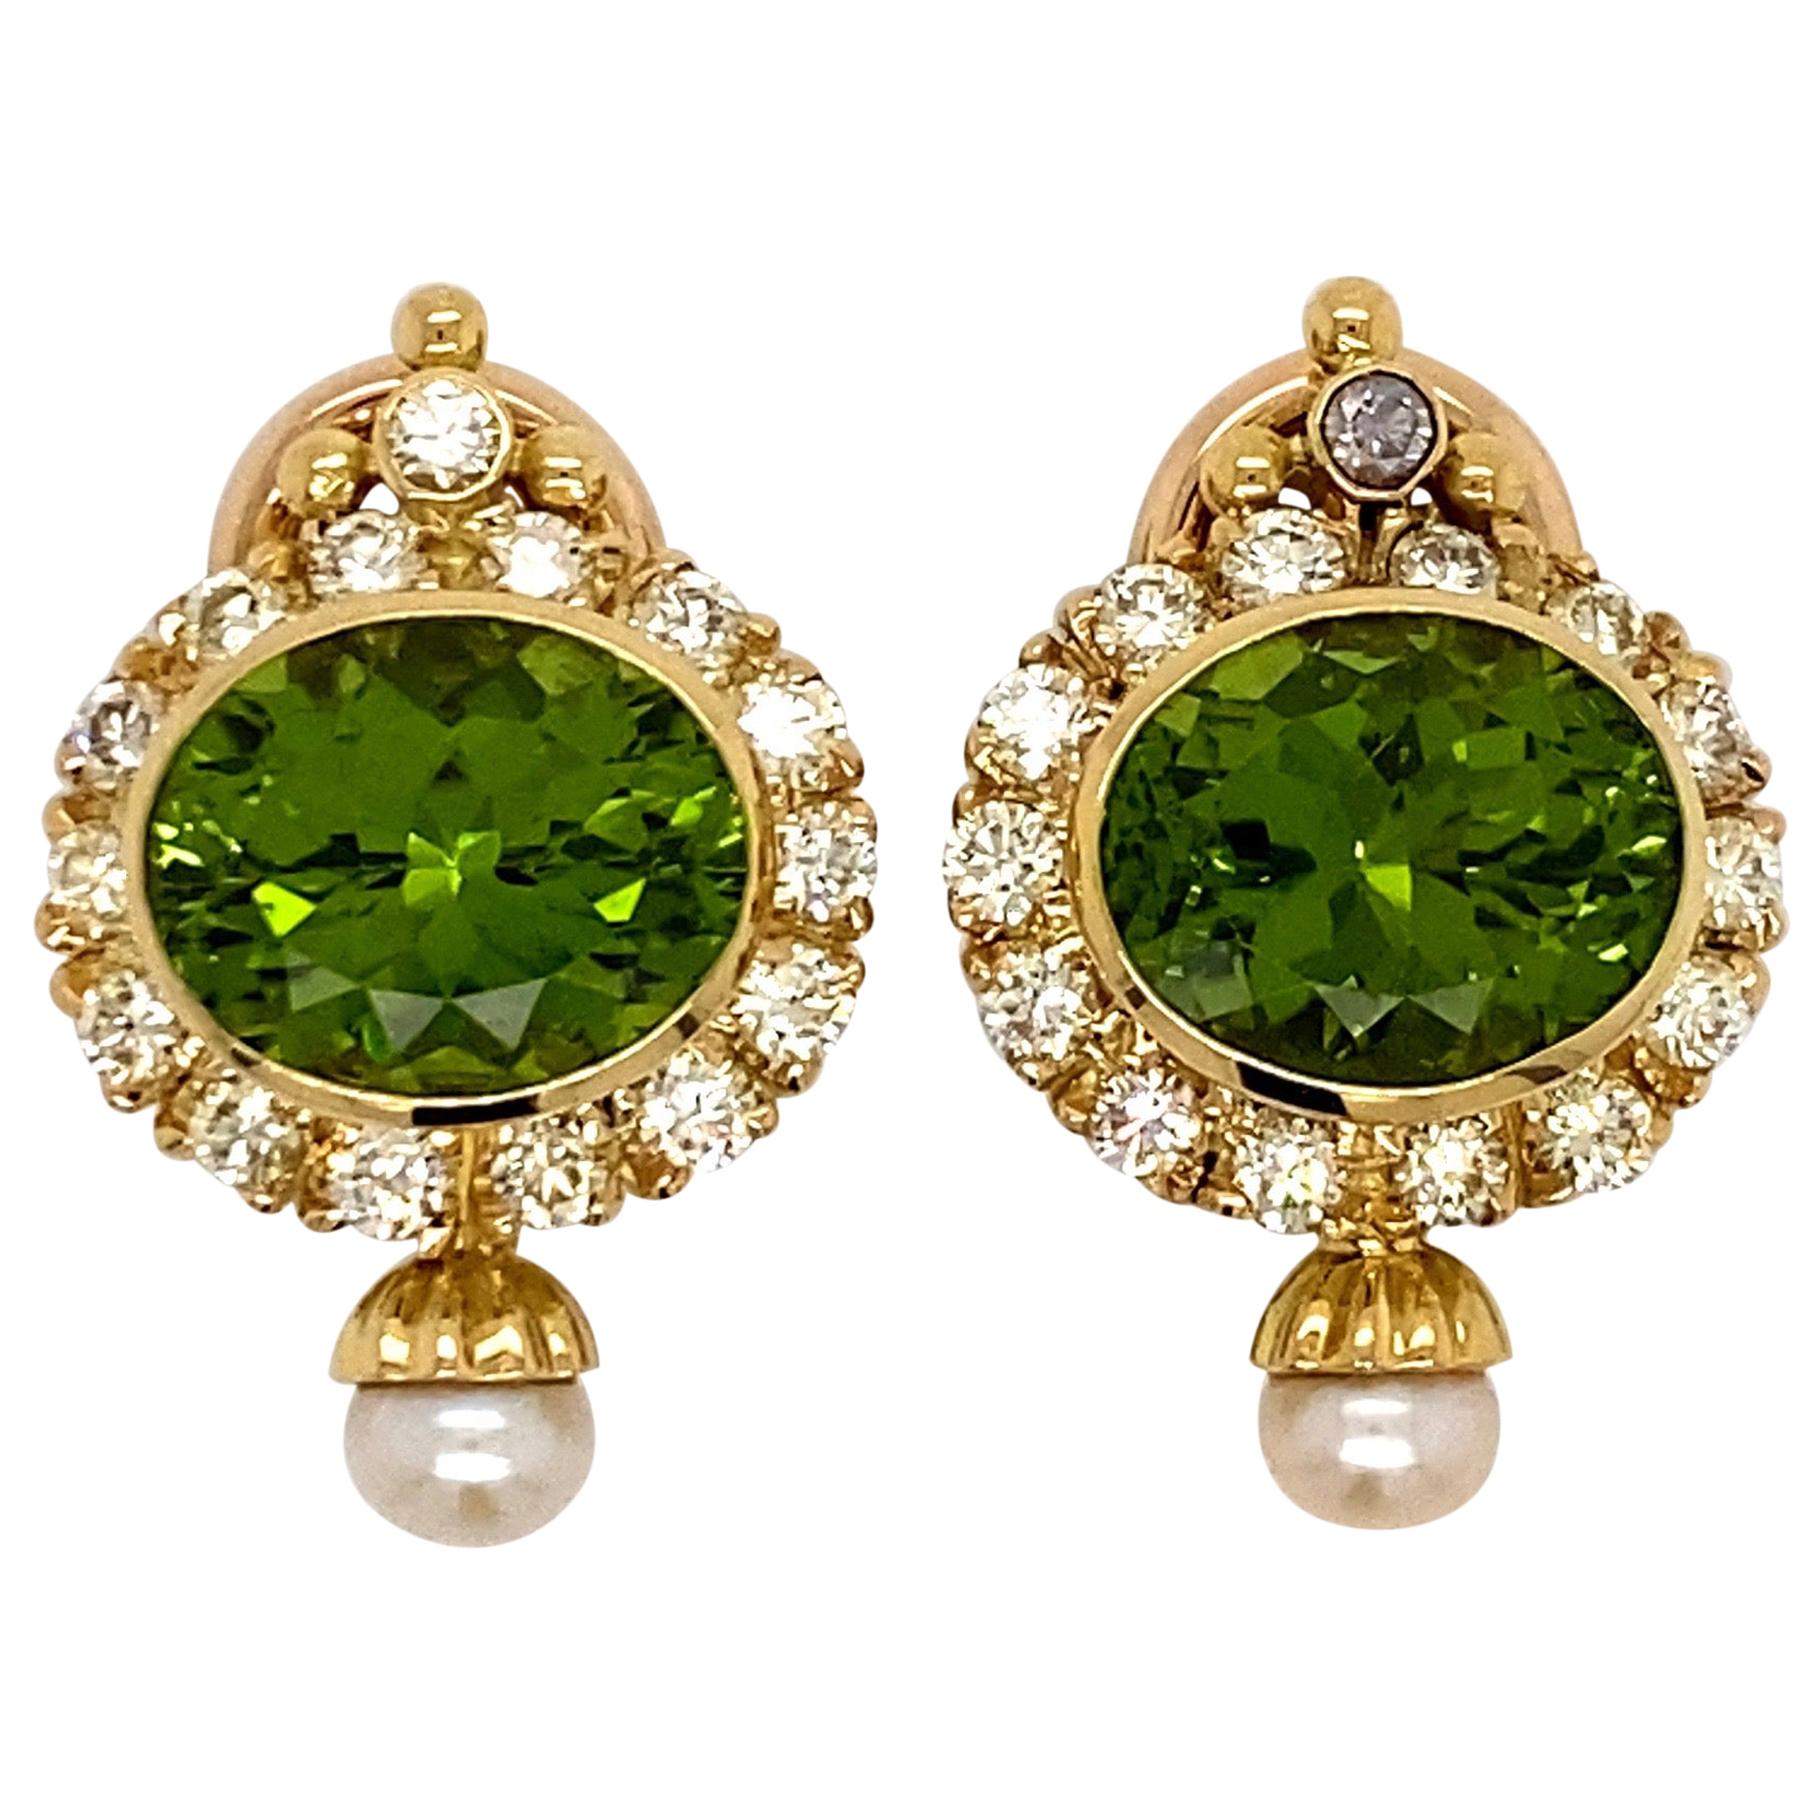 Vintage 18 Karat Yellow Gold Peridot and Diamond Clip Earrings with Pearls